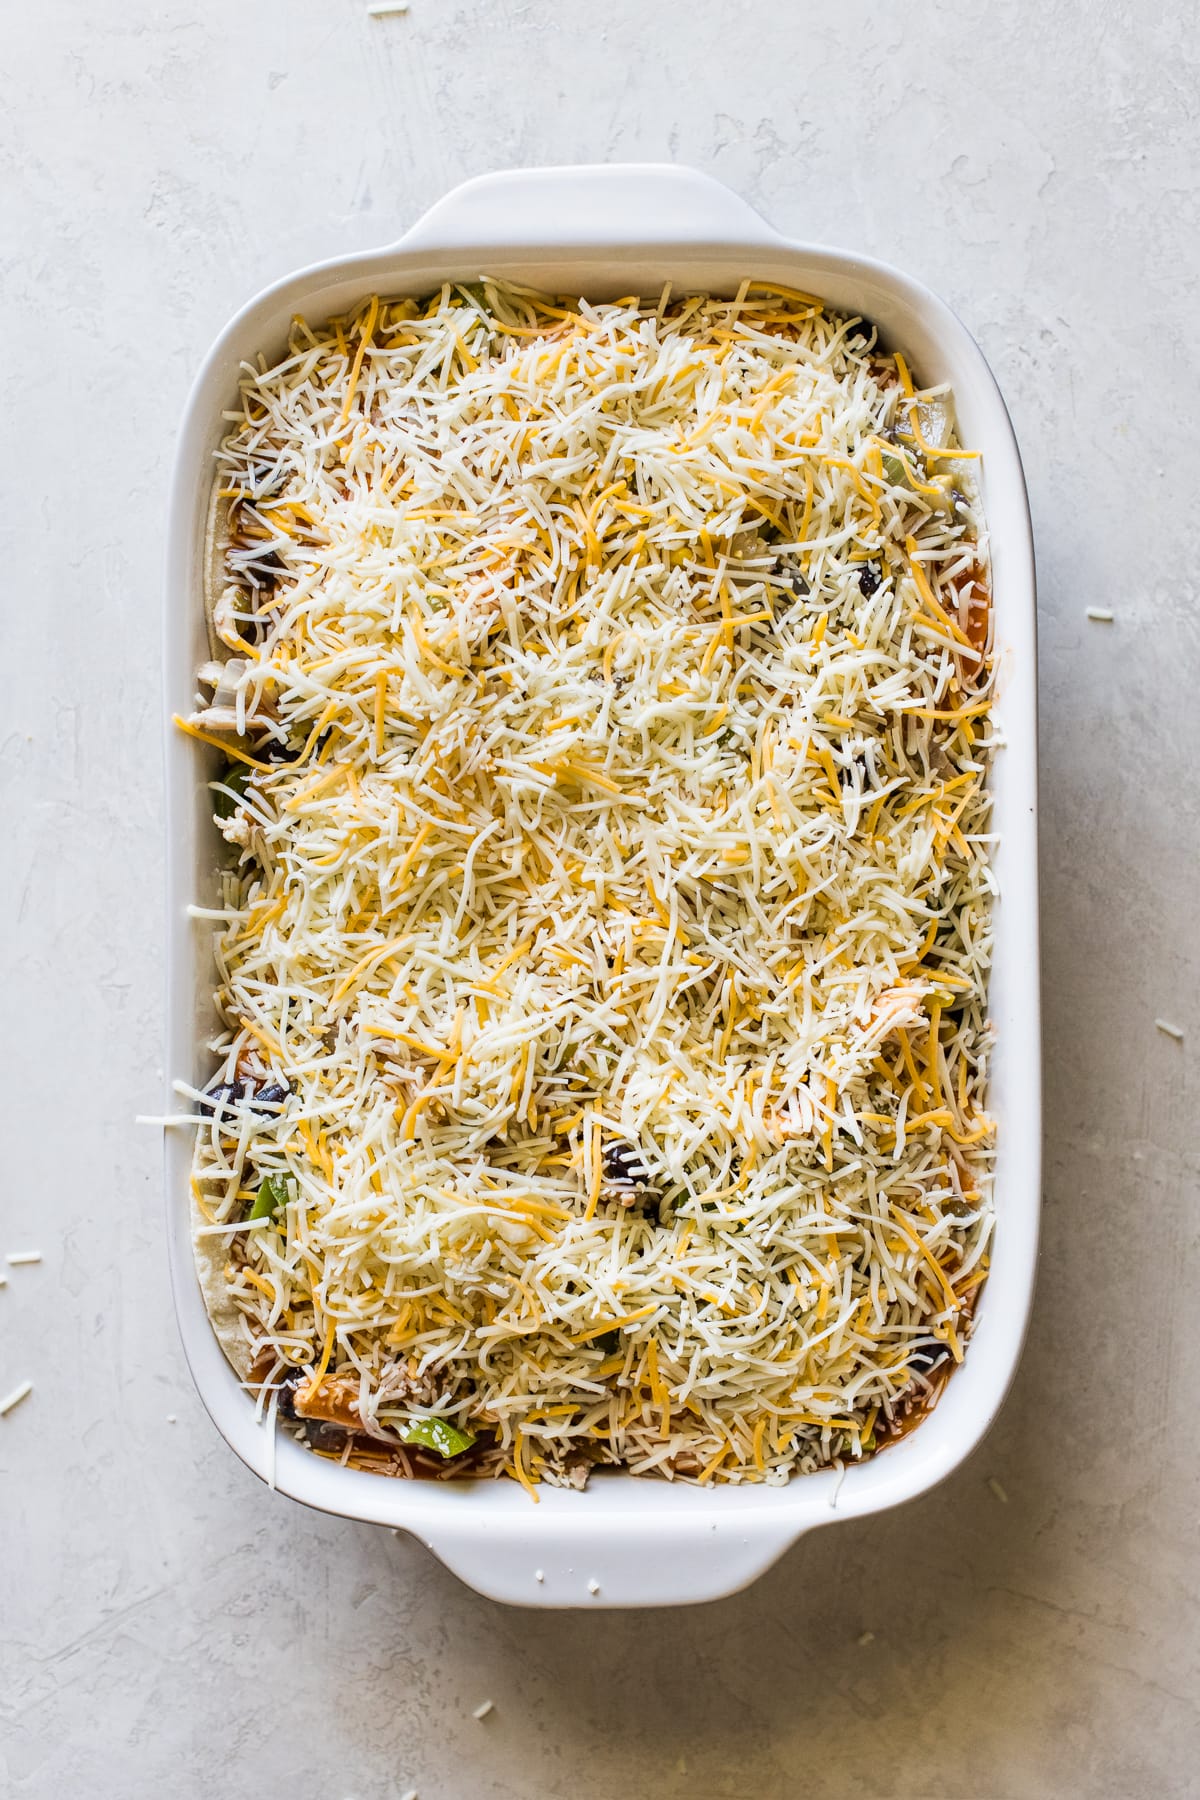 Shredded cheese on top of chicken enchilada casserole before baking.